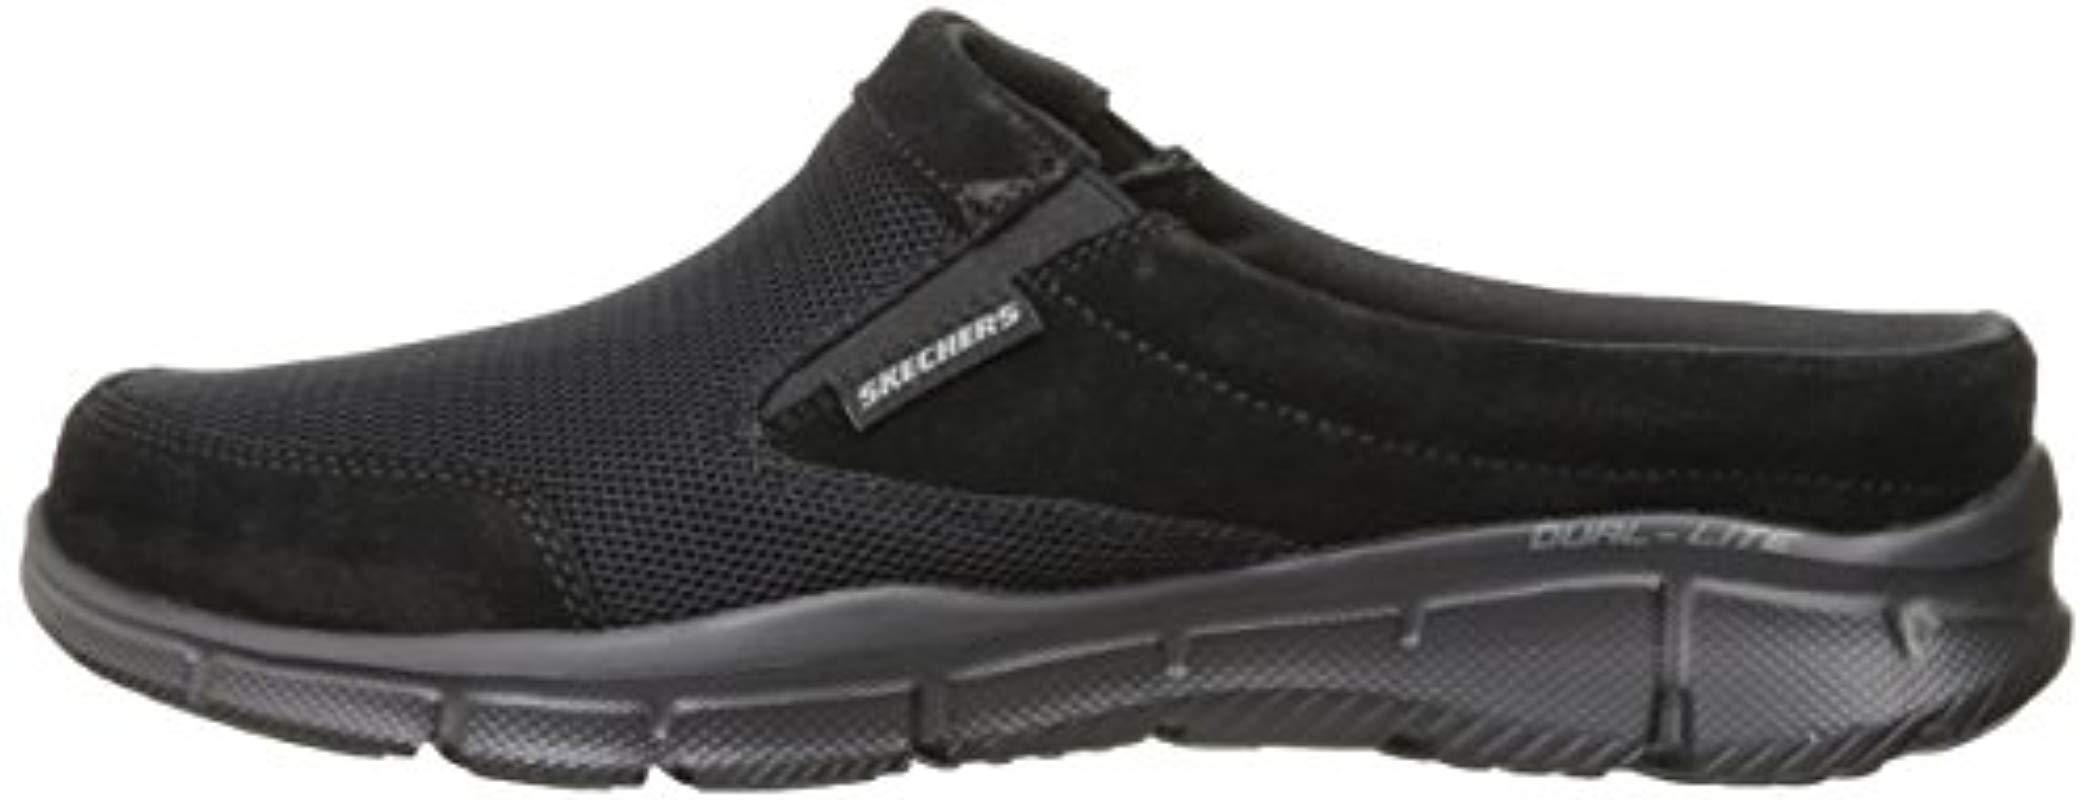 Lyst - Skechers Equalizer - Coast To Coast in Black for Men - Save 26. ...